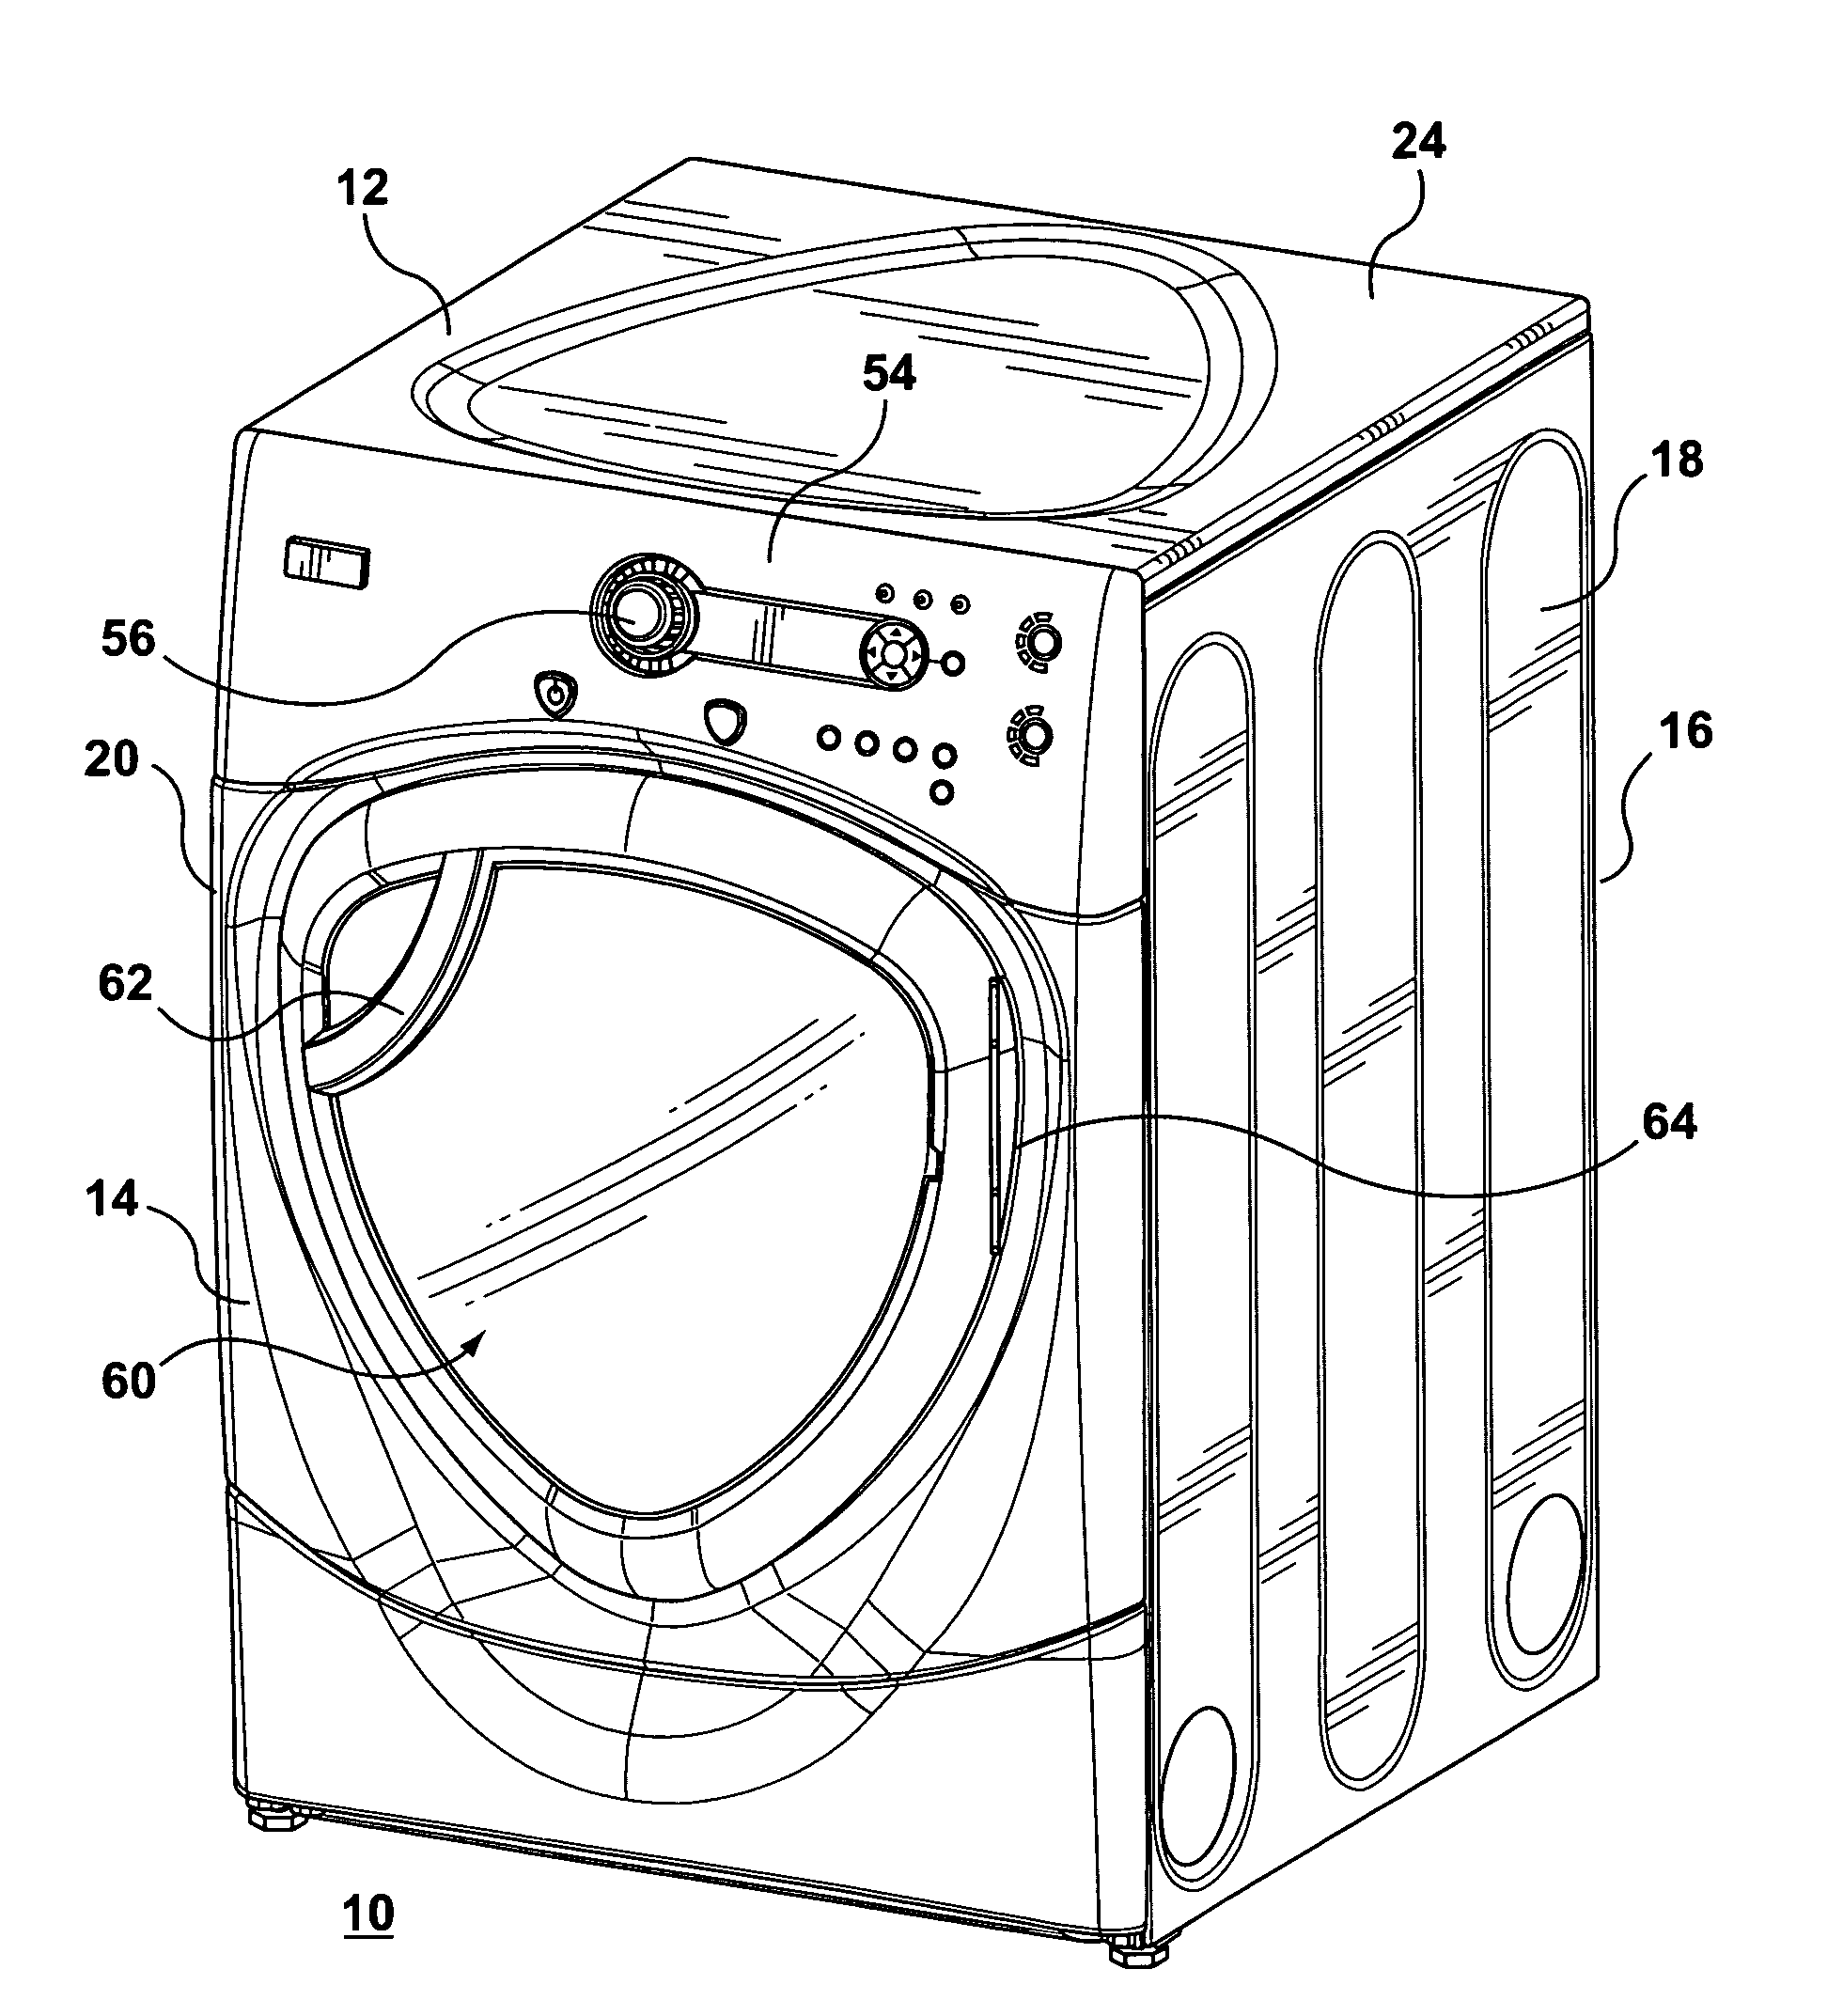 Clothes dryer apparatus and method for de-wrinkling clothes with reduced condensation